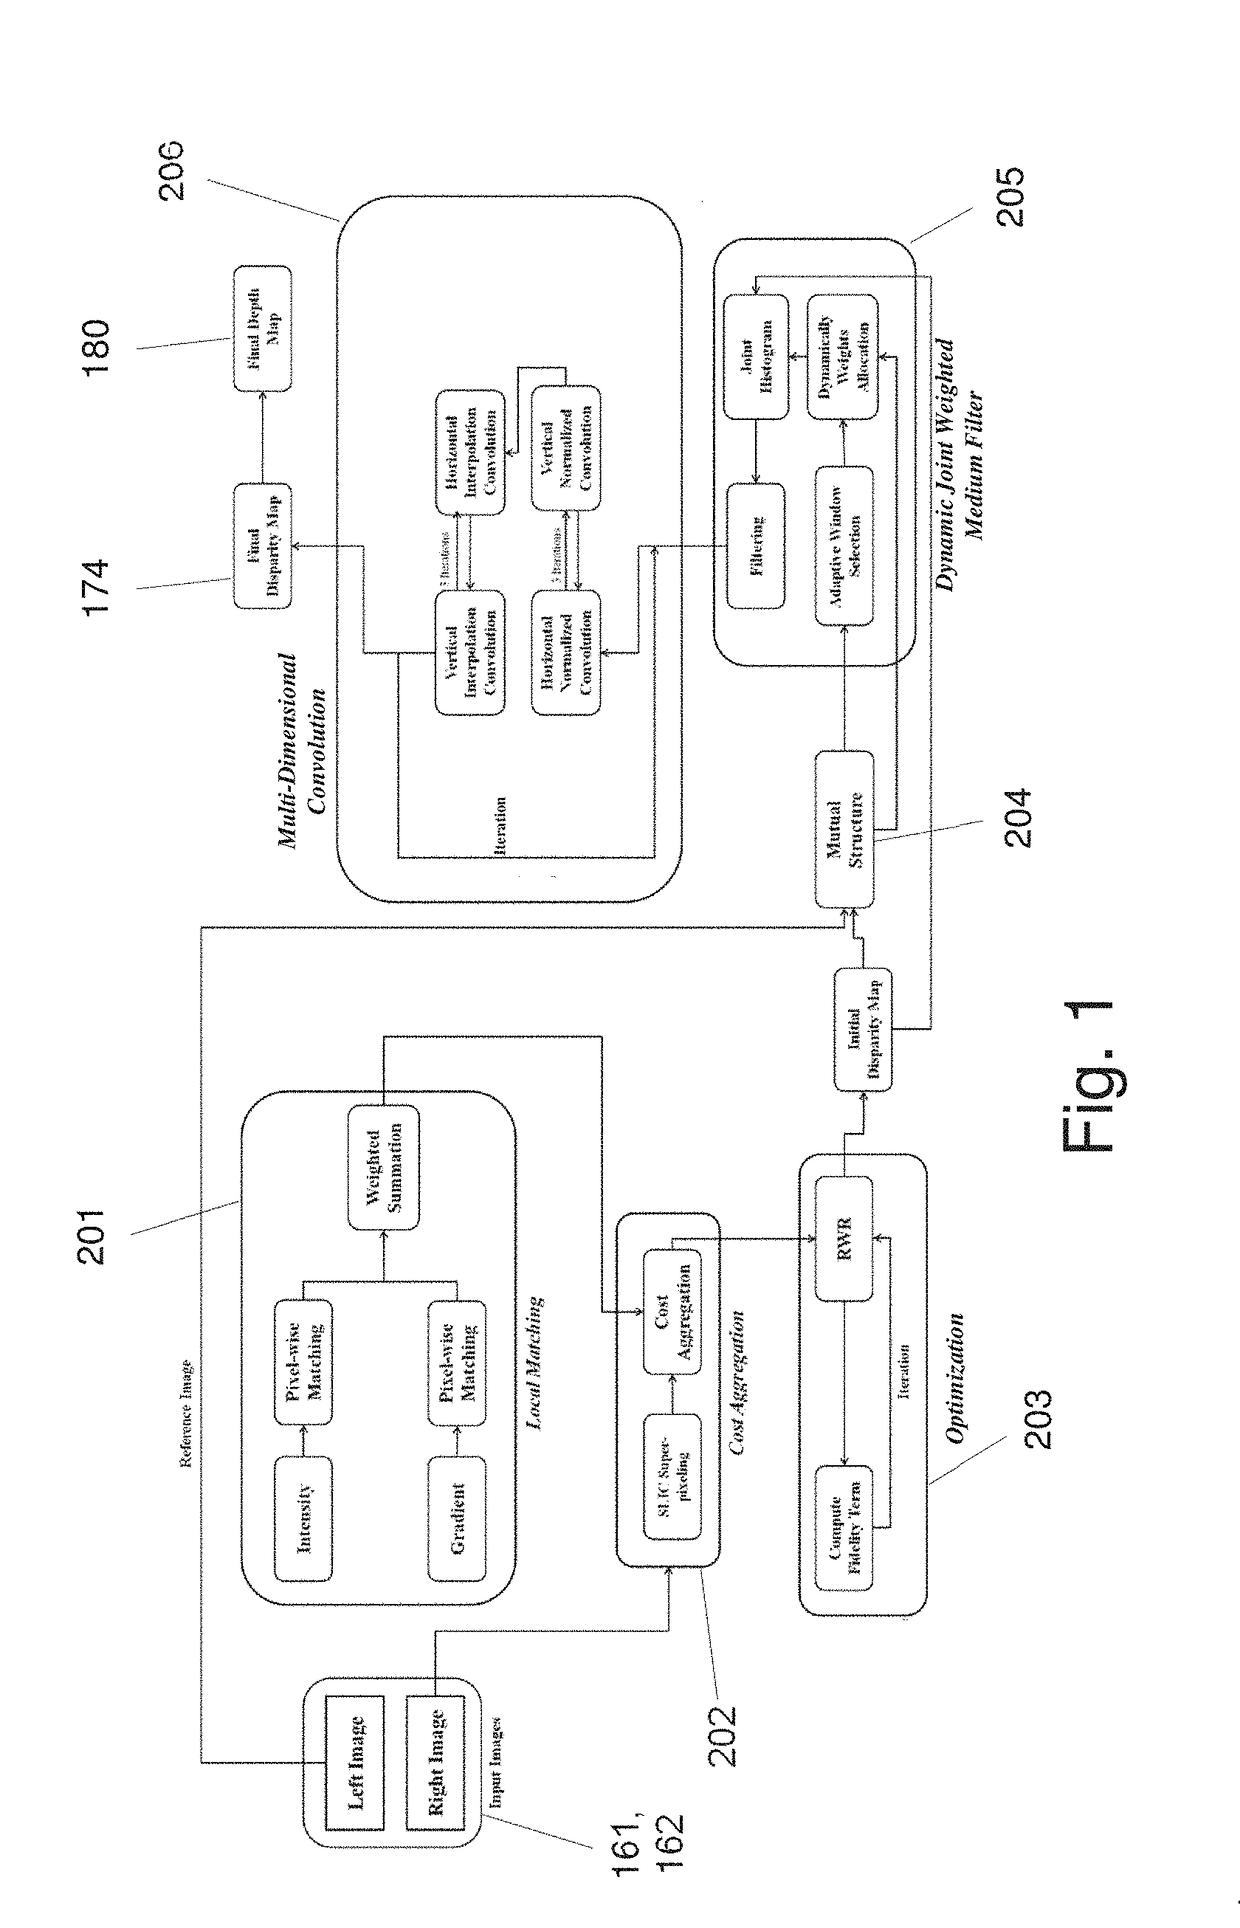 Systems and Methods for Estimating and Refining Depth Maps